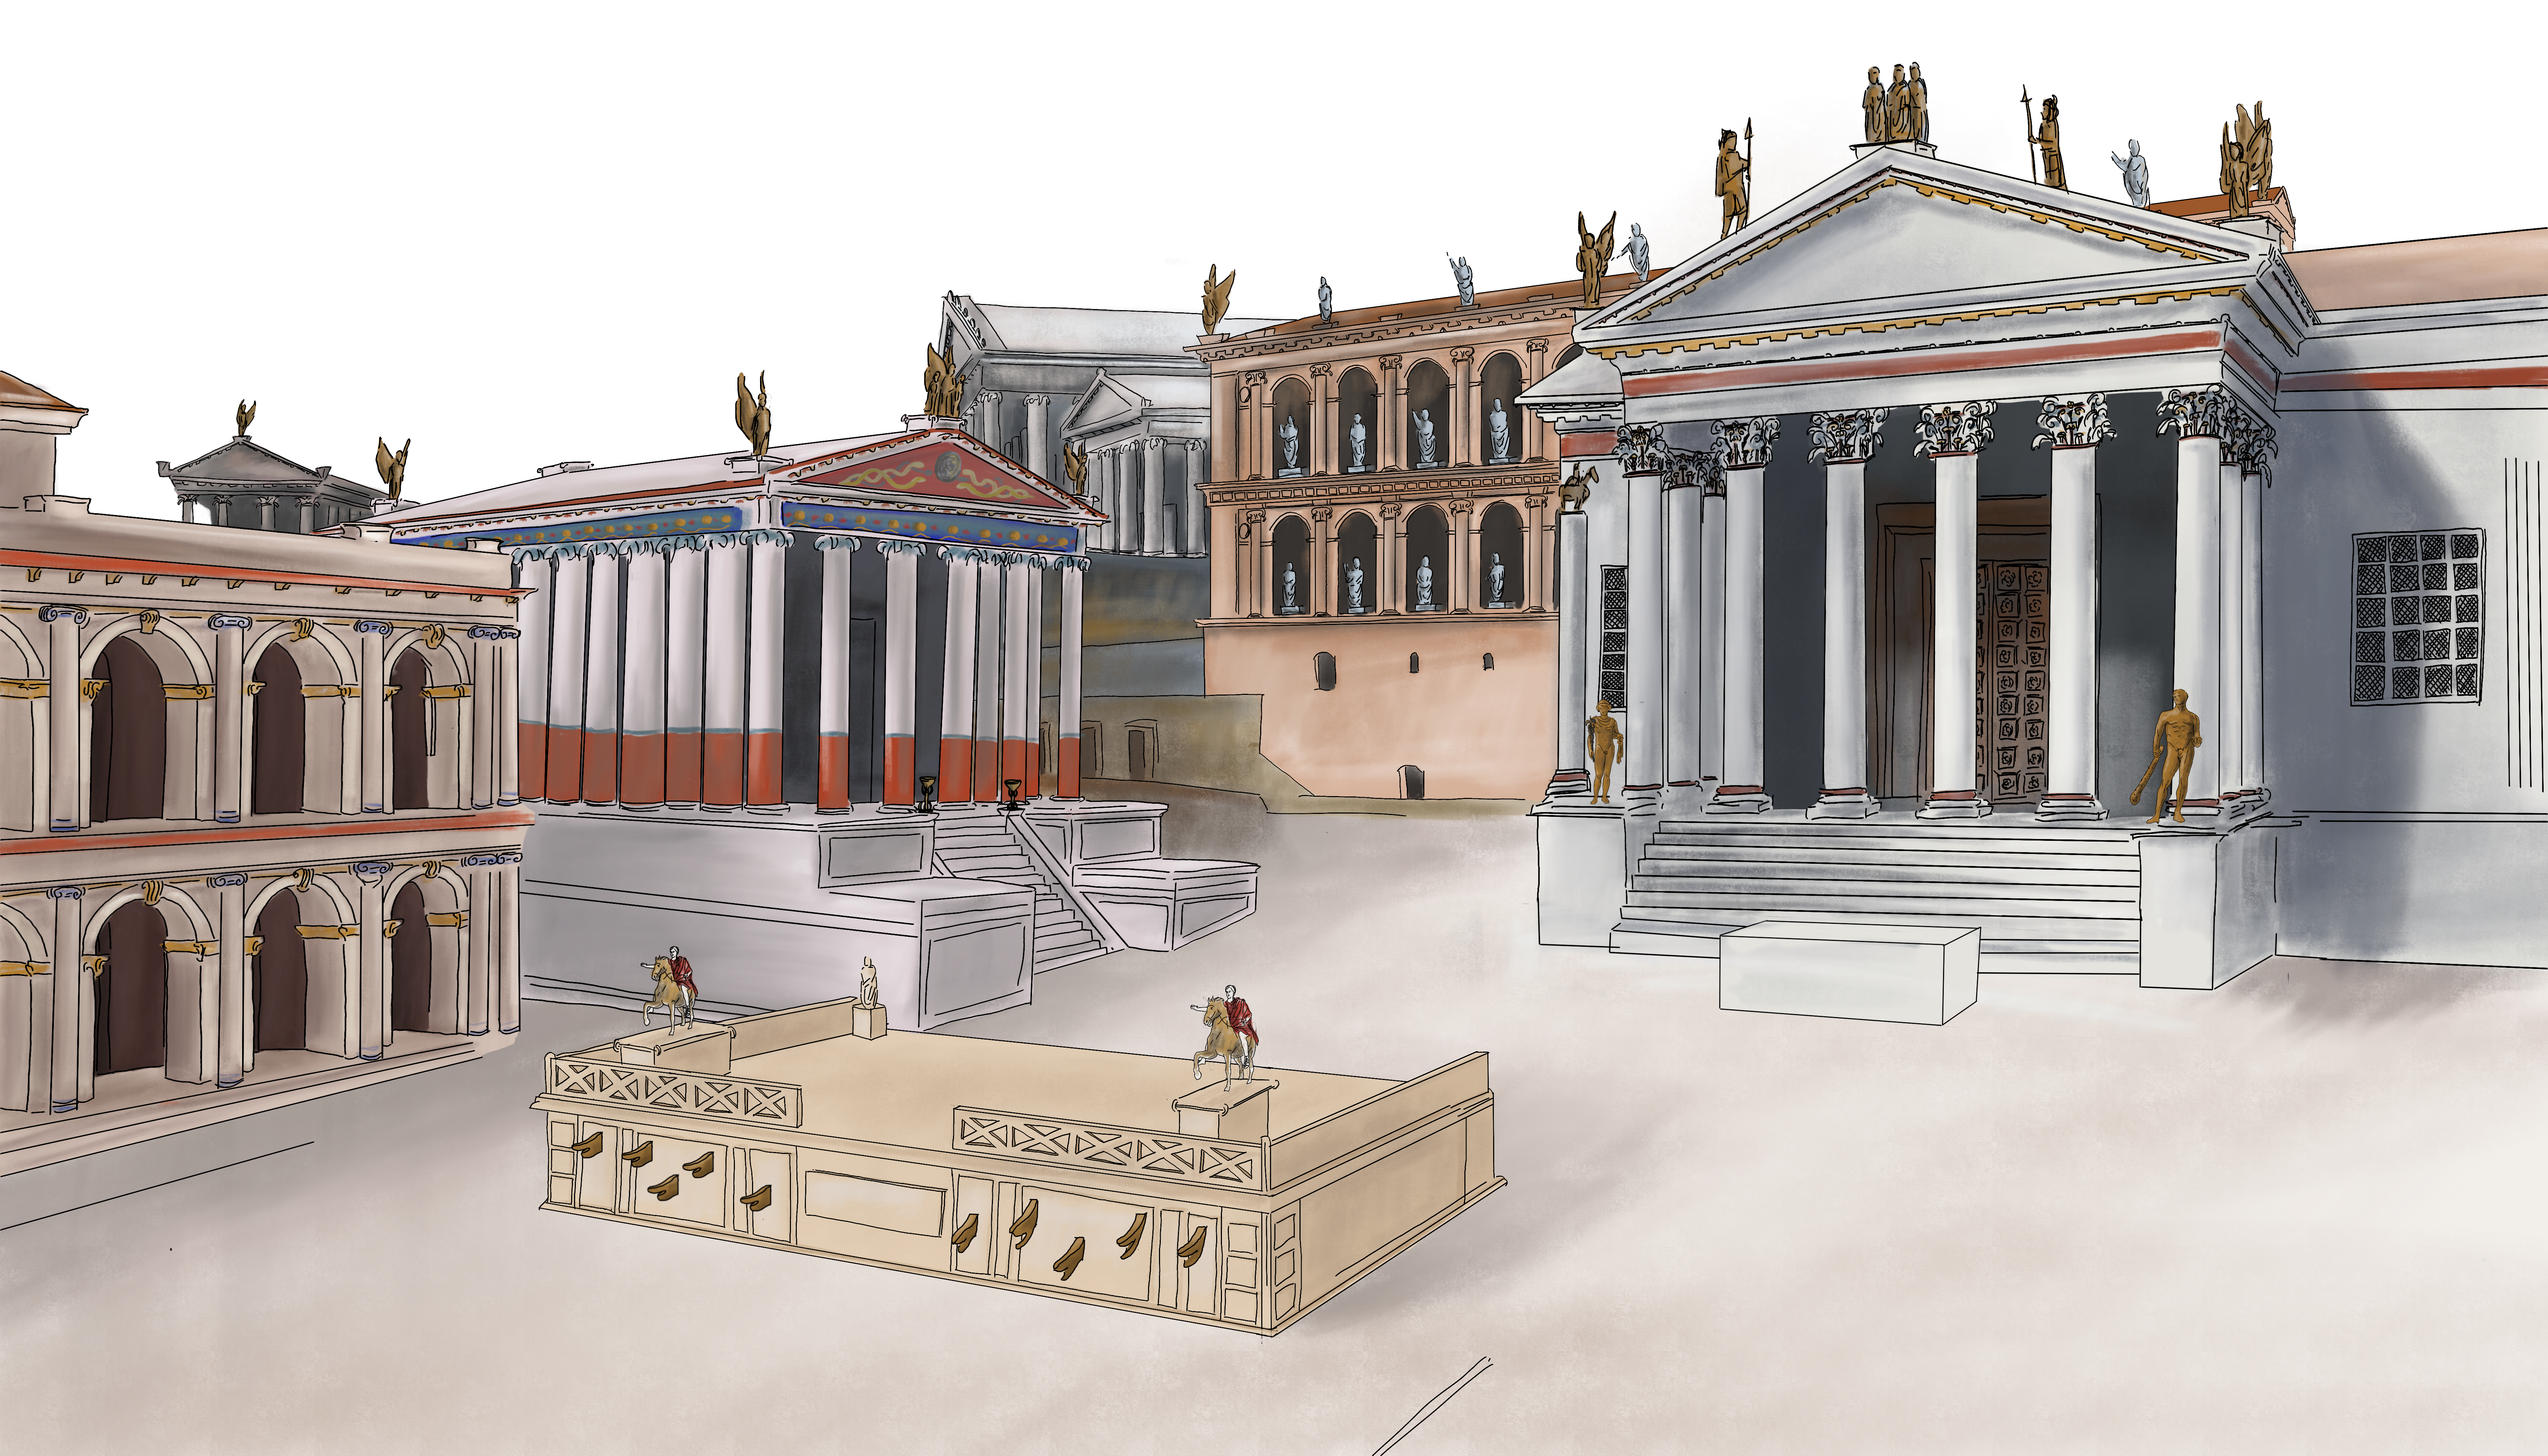 A reconstructed illustration of the Roman forum